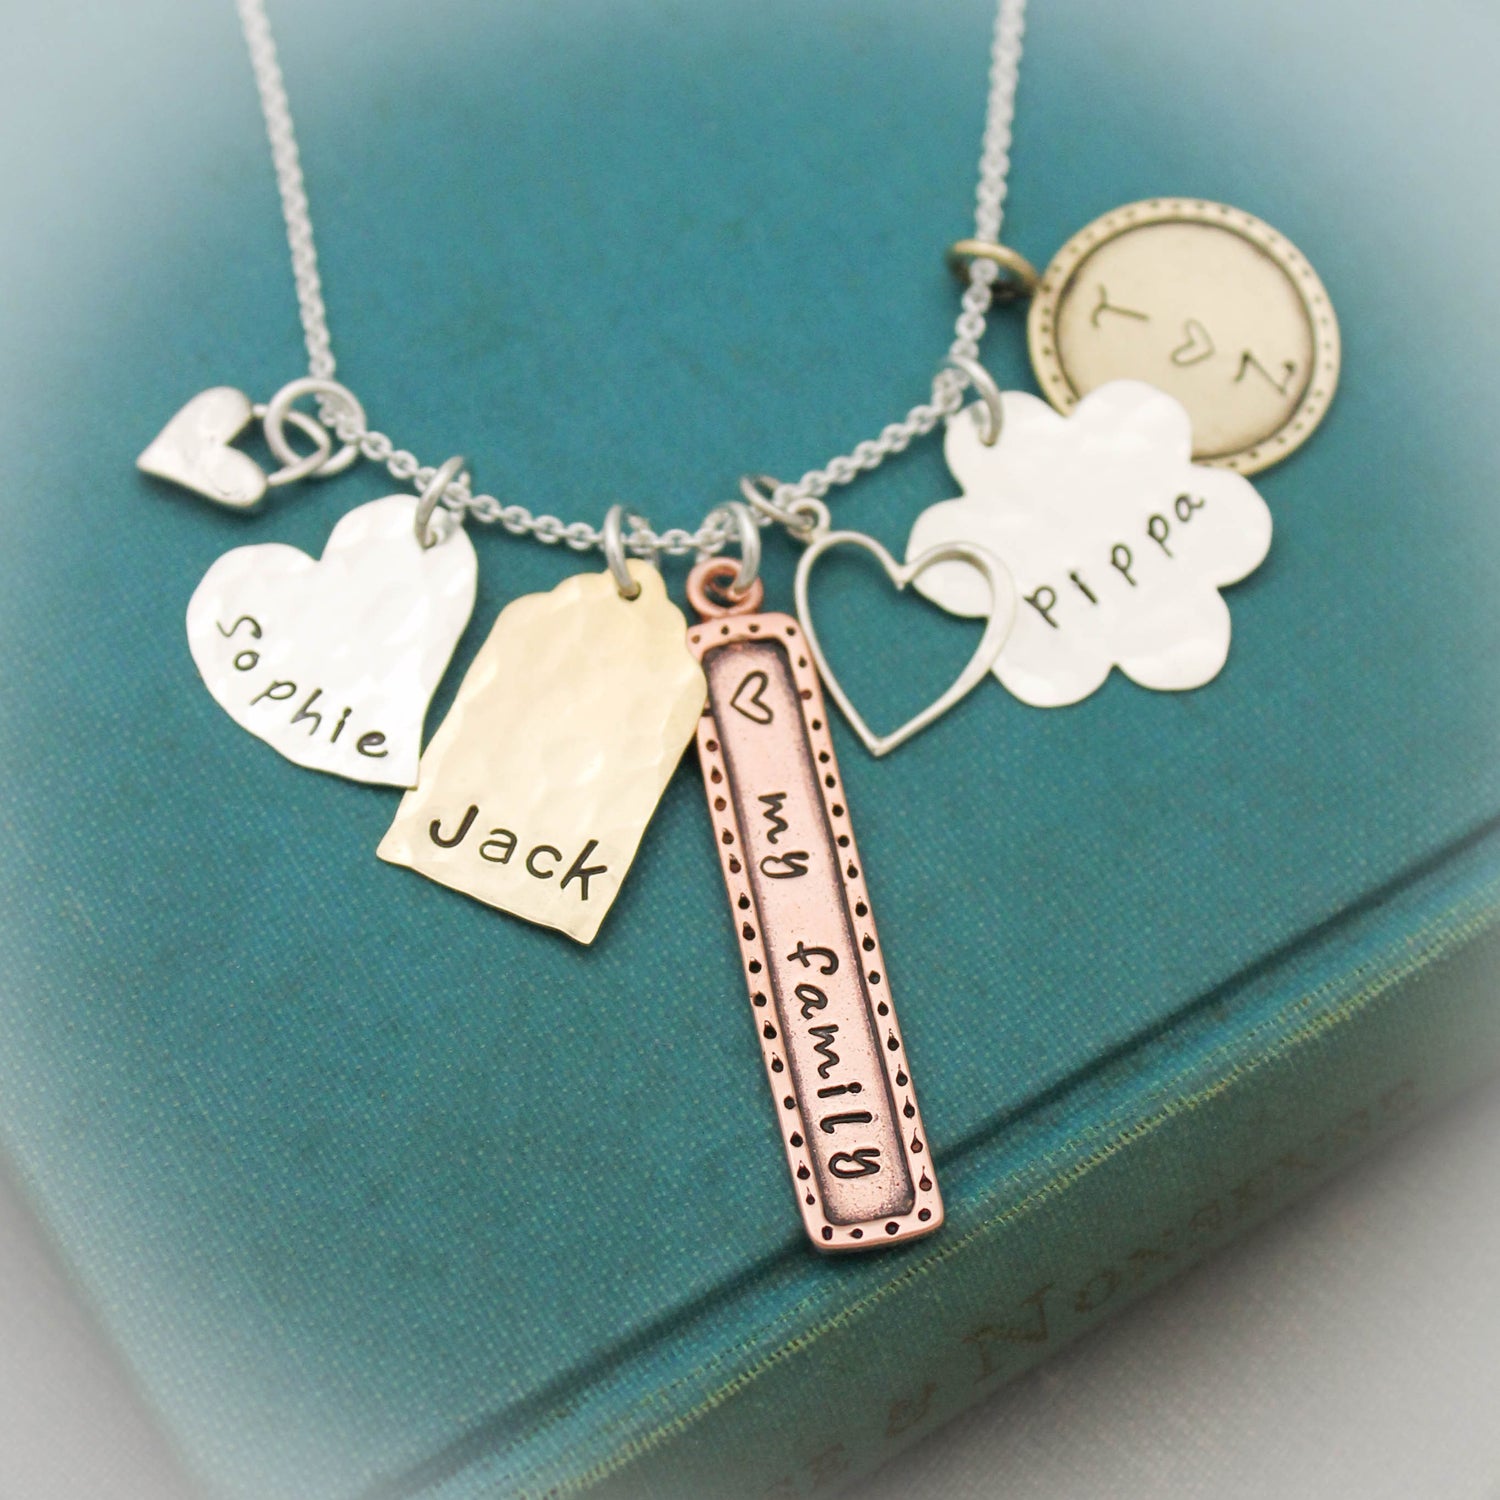 Personalized Charm Necklace, Mommy Necklace, Family Jewelry, Hand Stamped Jewelry, Mixed Metals Necklace, Mother's Day Gifts, Gifts for Her